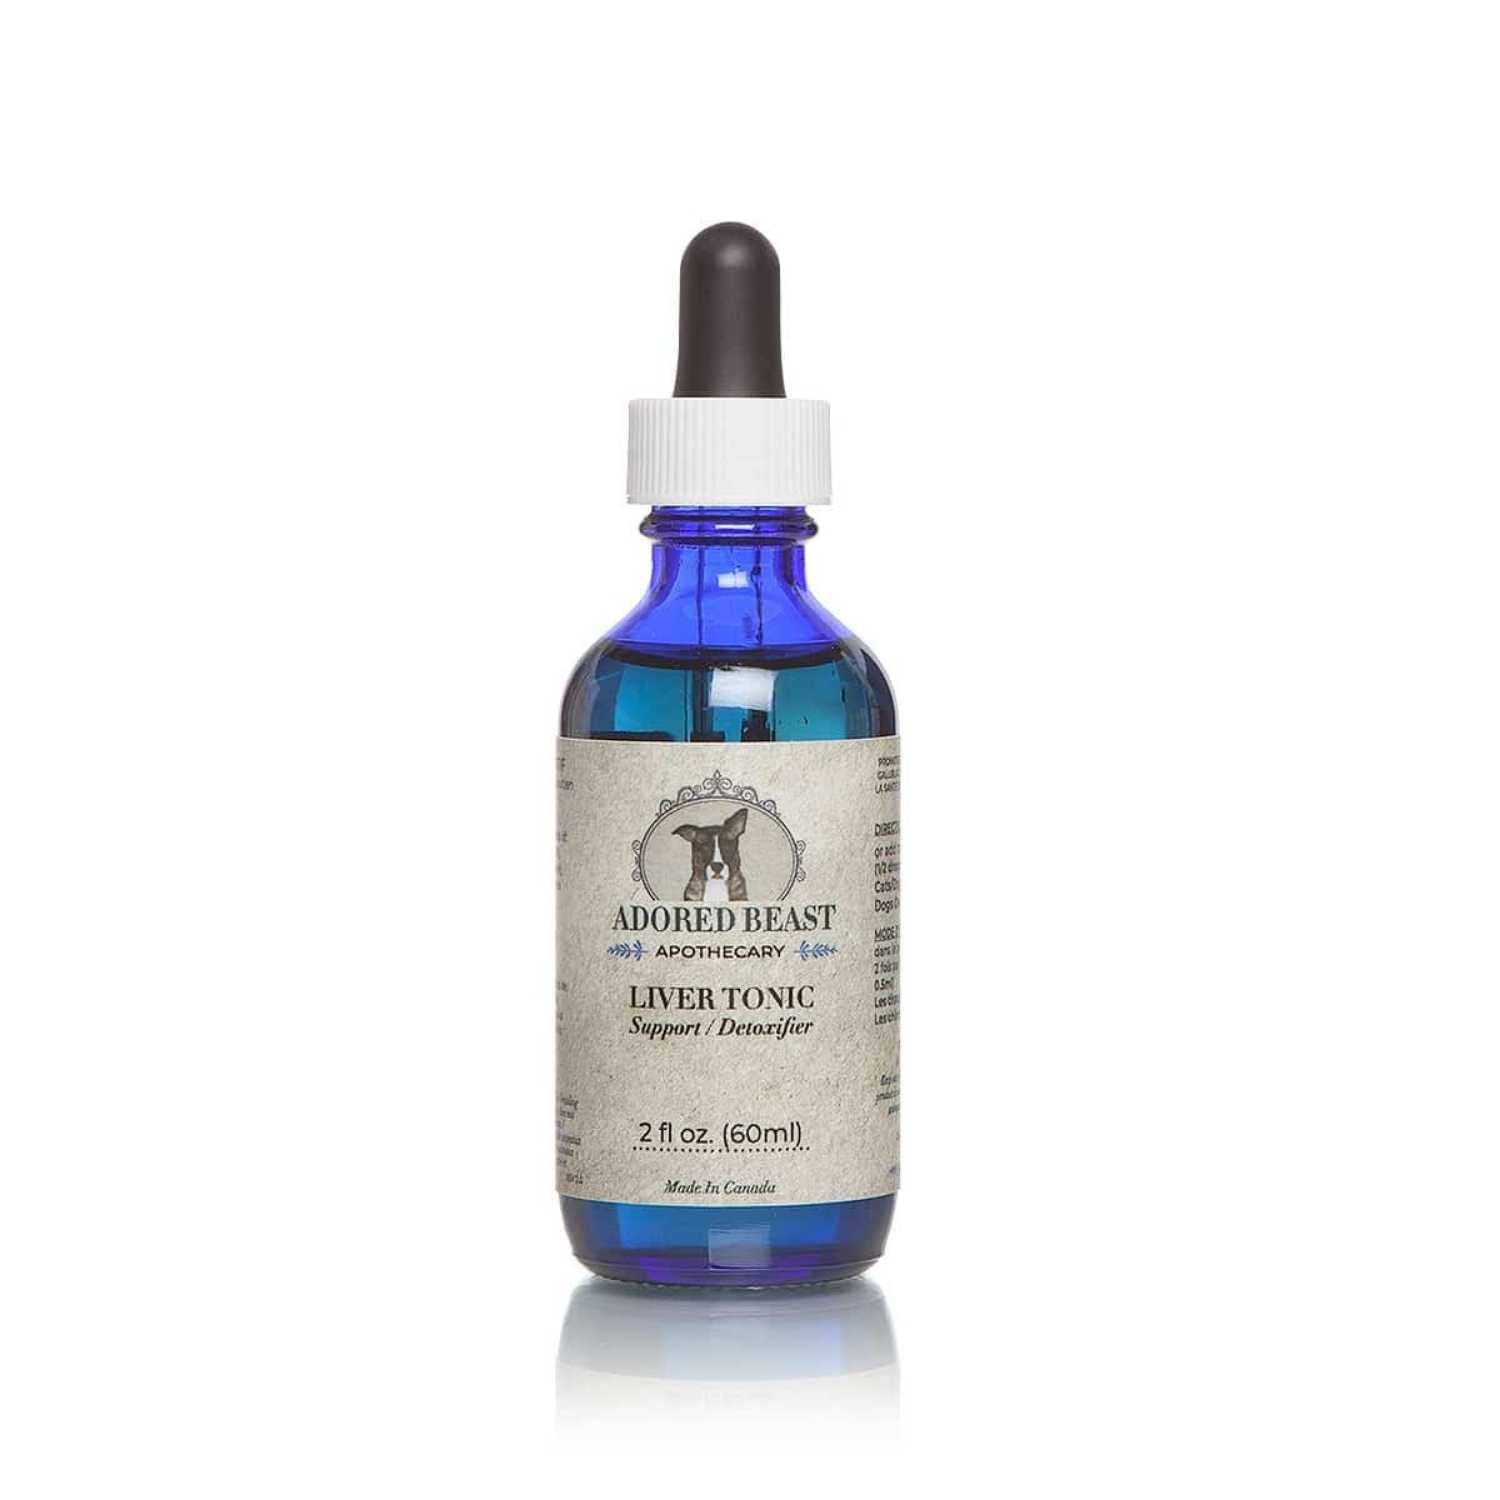 Adored Beast Apothecary Liver Tonic Support Detoxifier 60ml Bottle